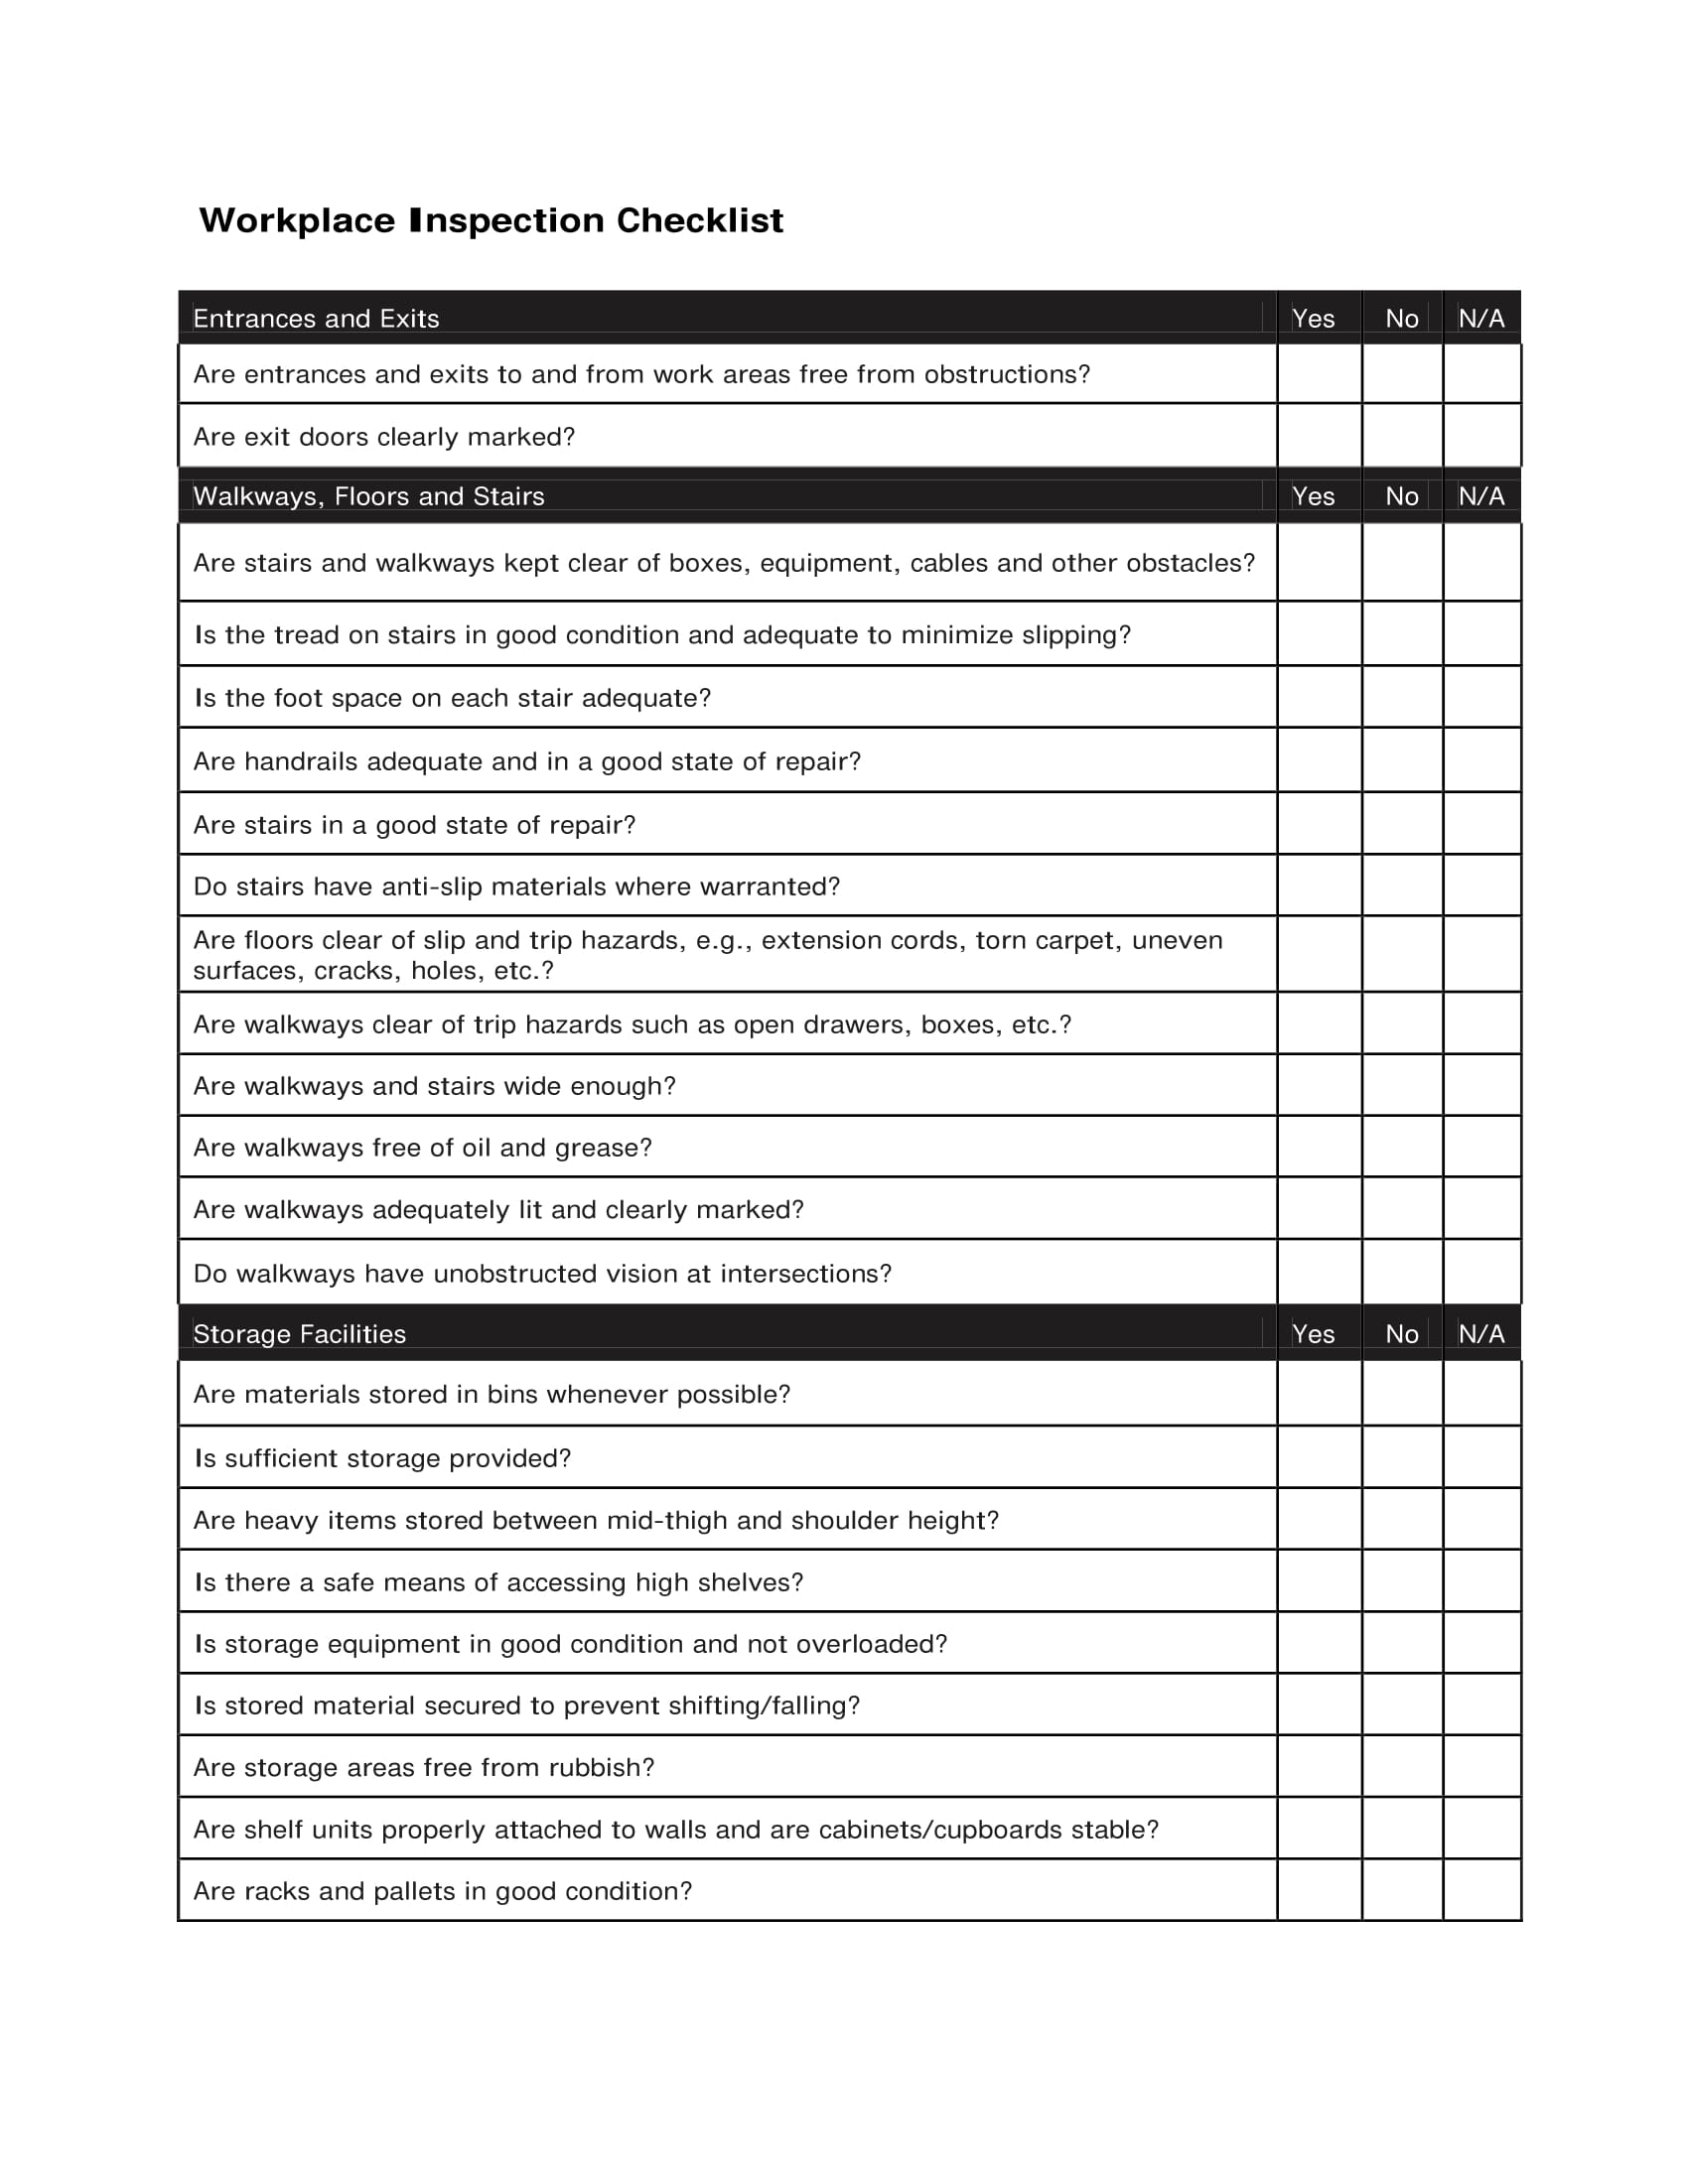 Workplace Inspection Checklist Example